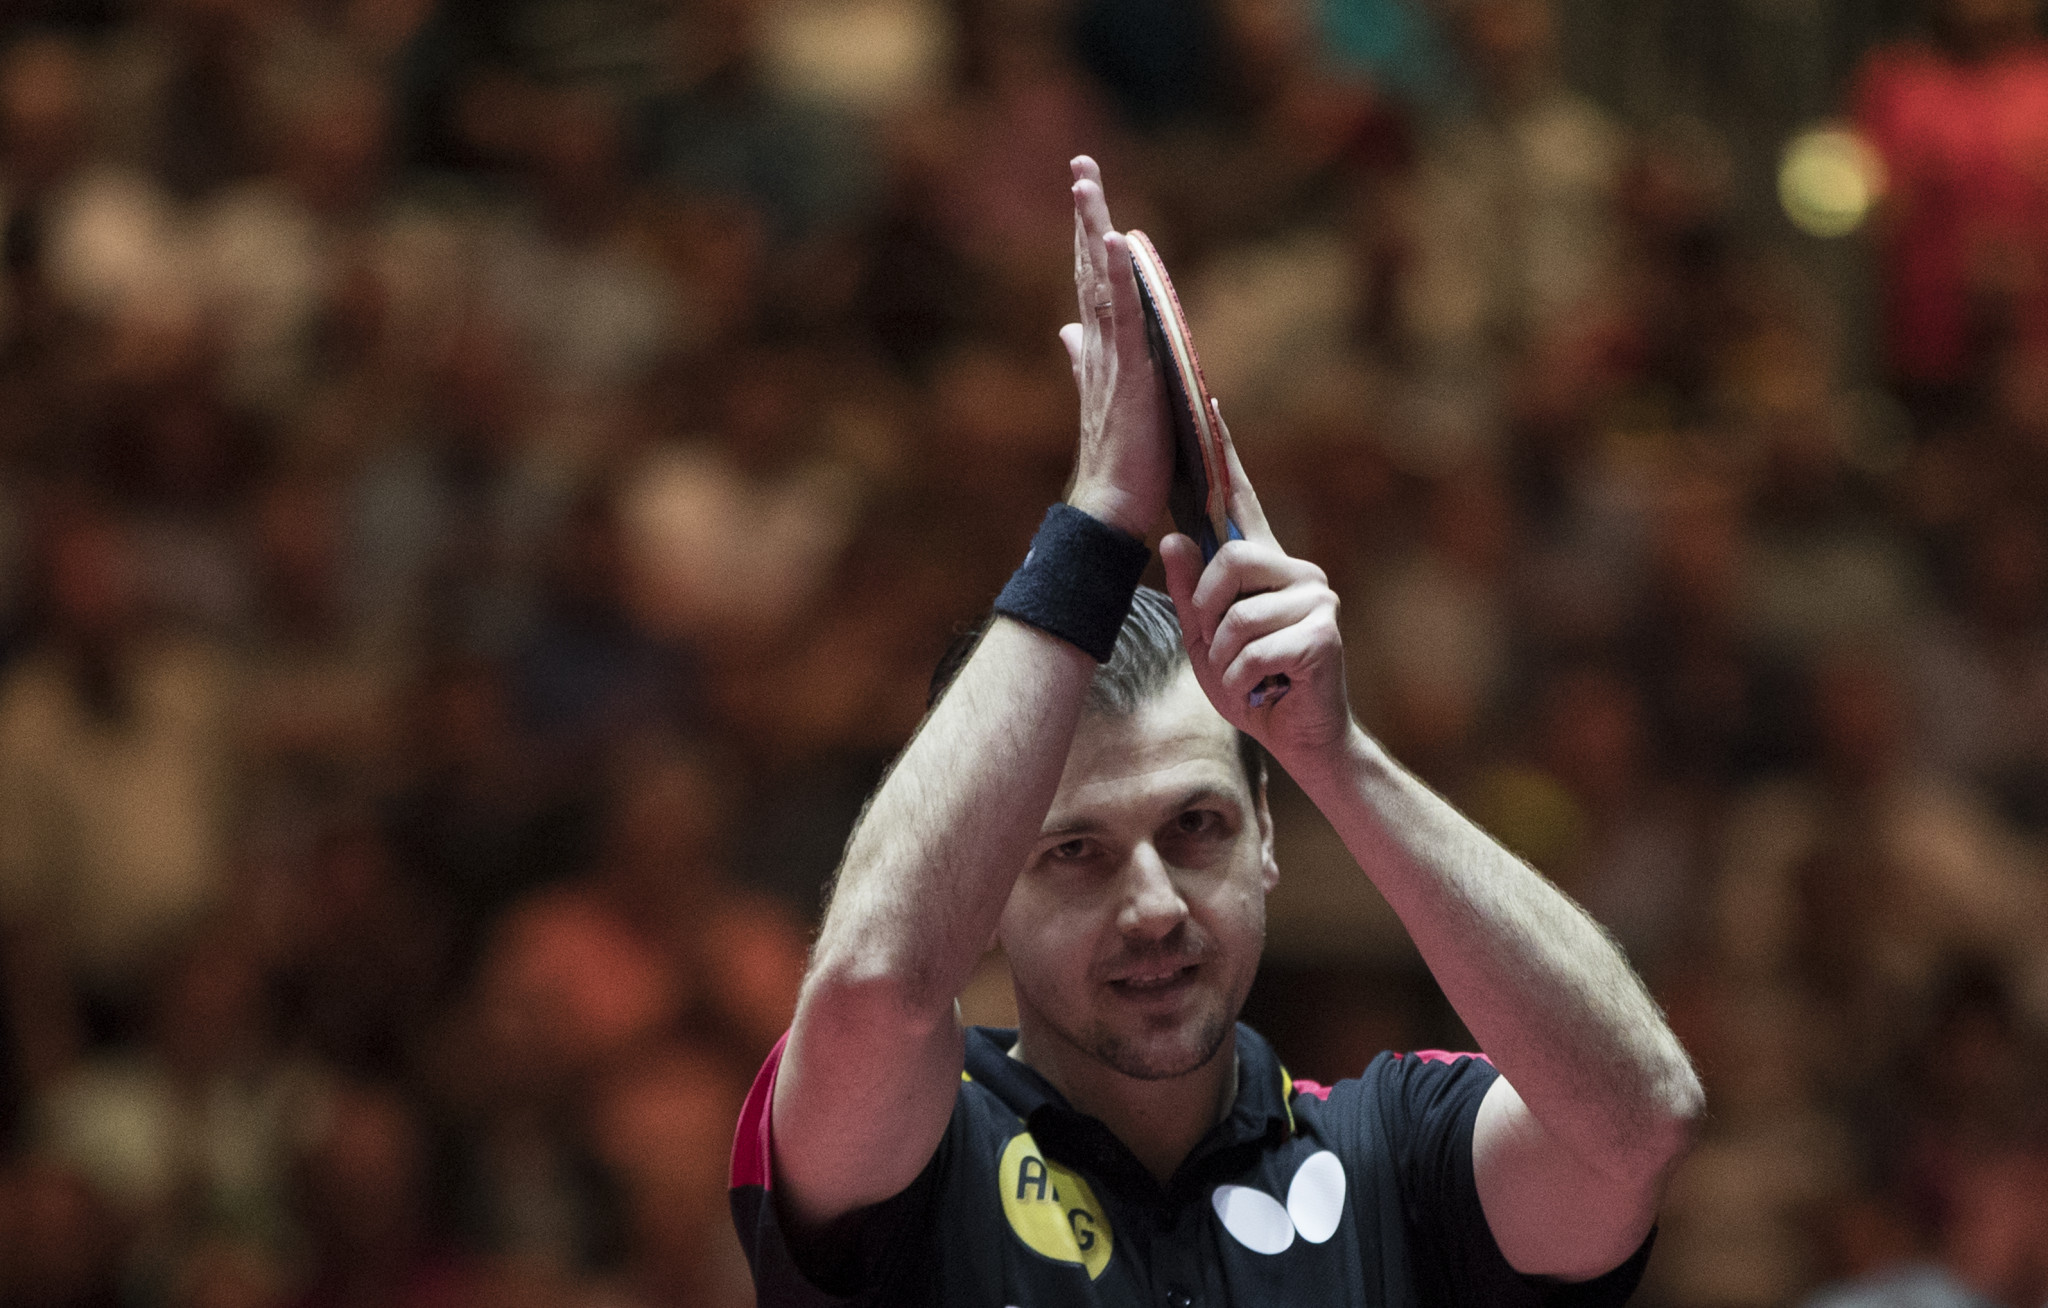 Timo Boll will become the oldest men's number one ©Getty Images